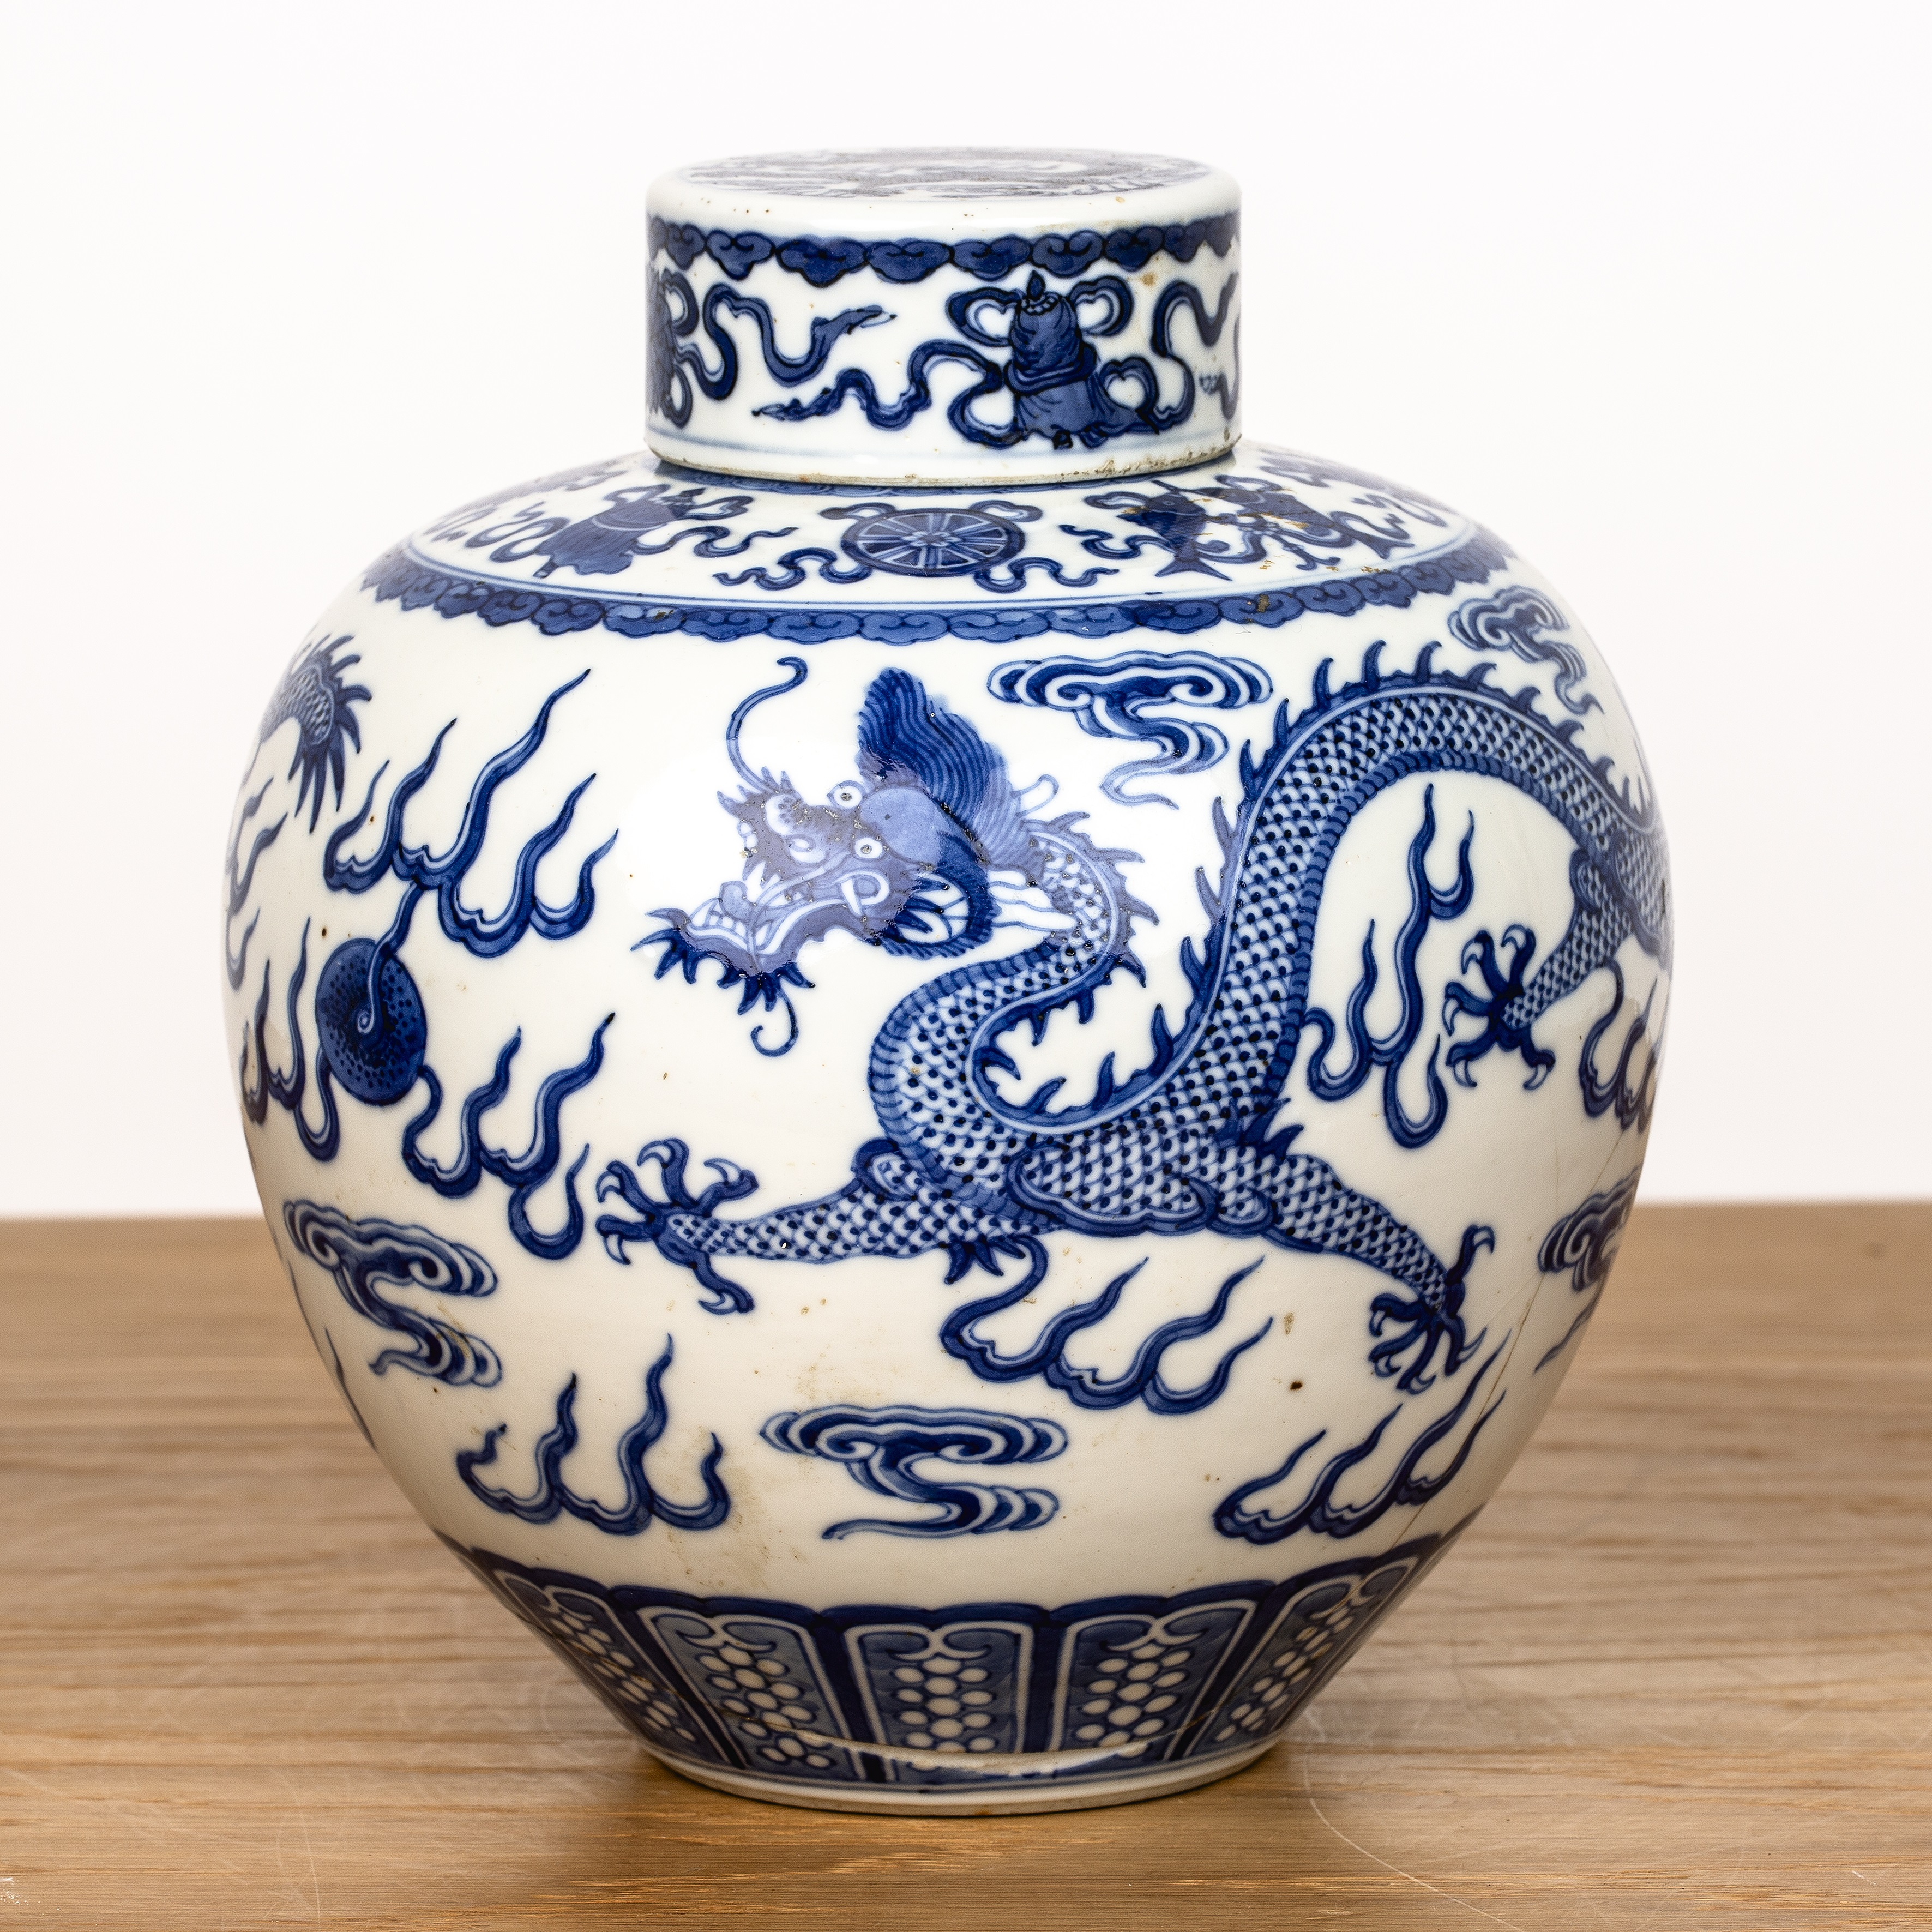 Ovoid blue and white vase and cover Chinese, 19th Century painted with a dragon and flaming - Image 2 of 4